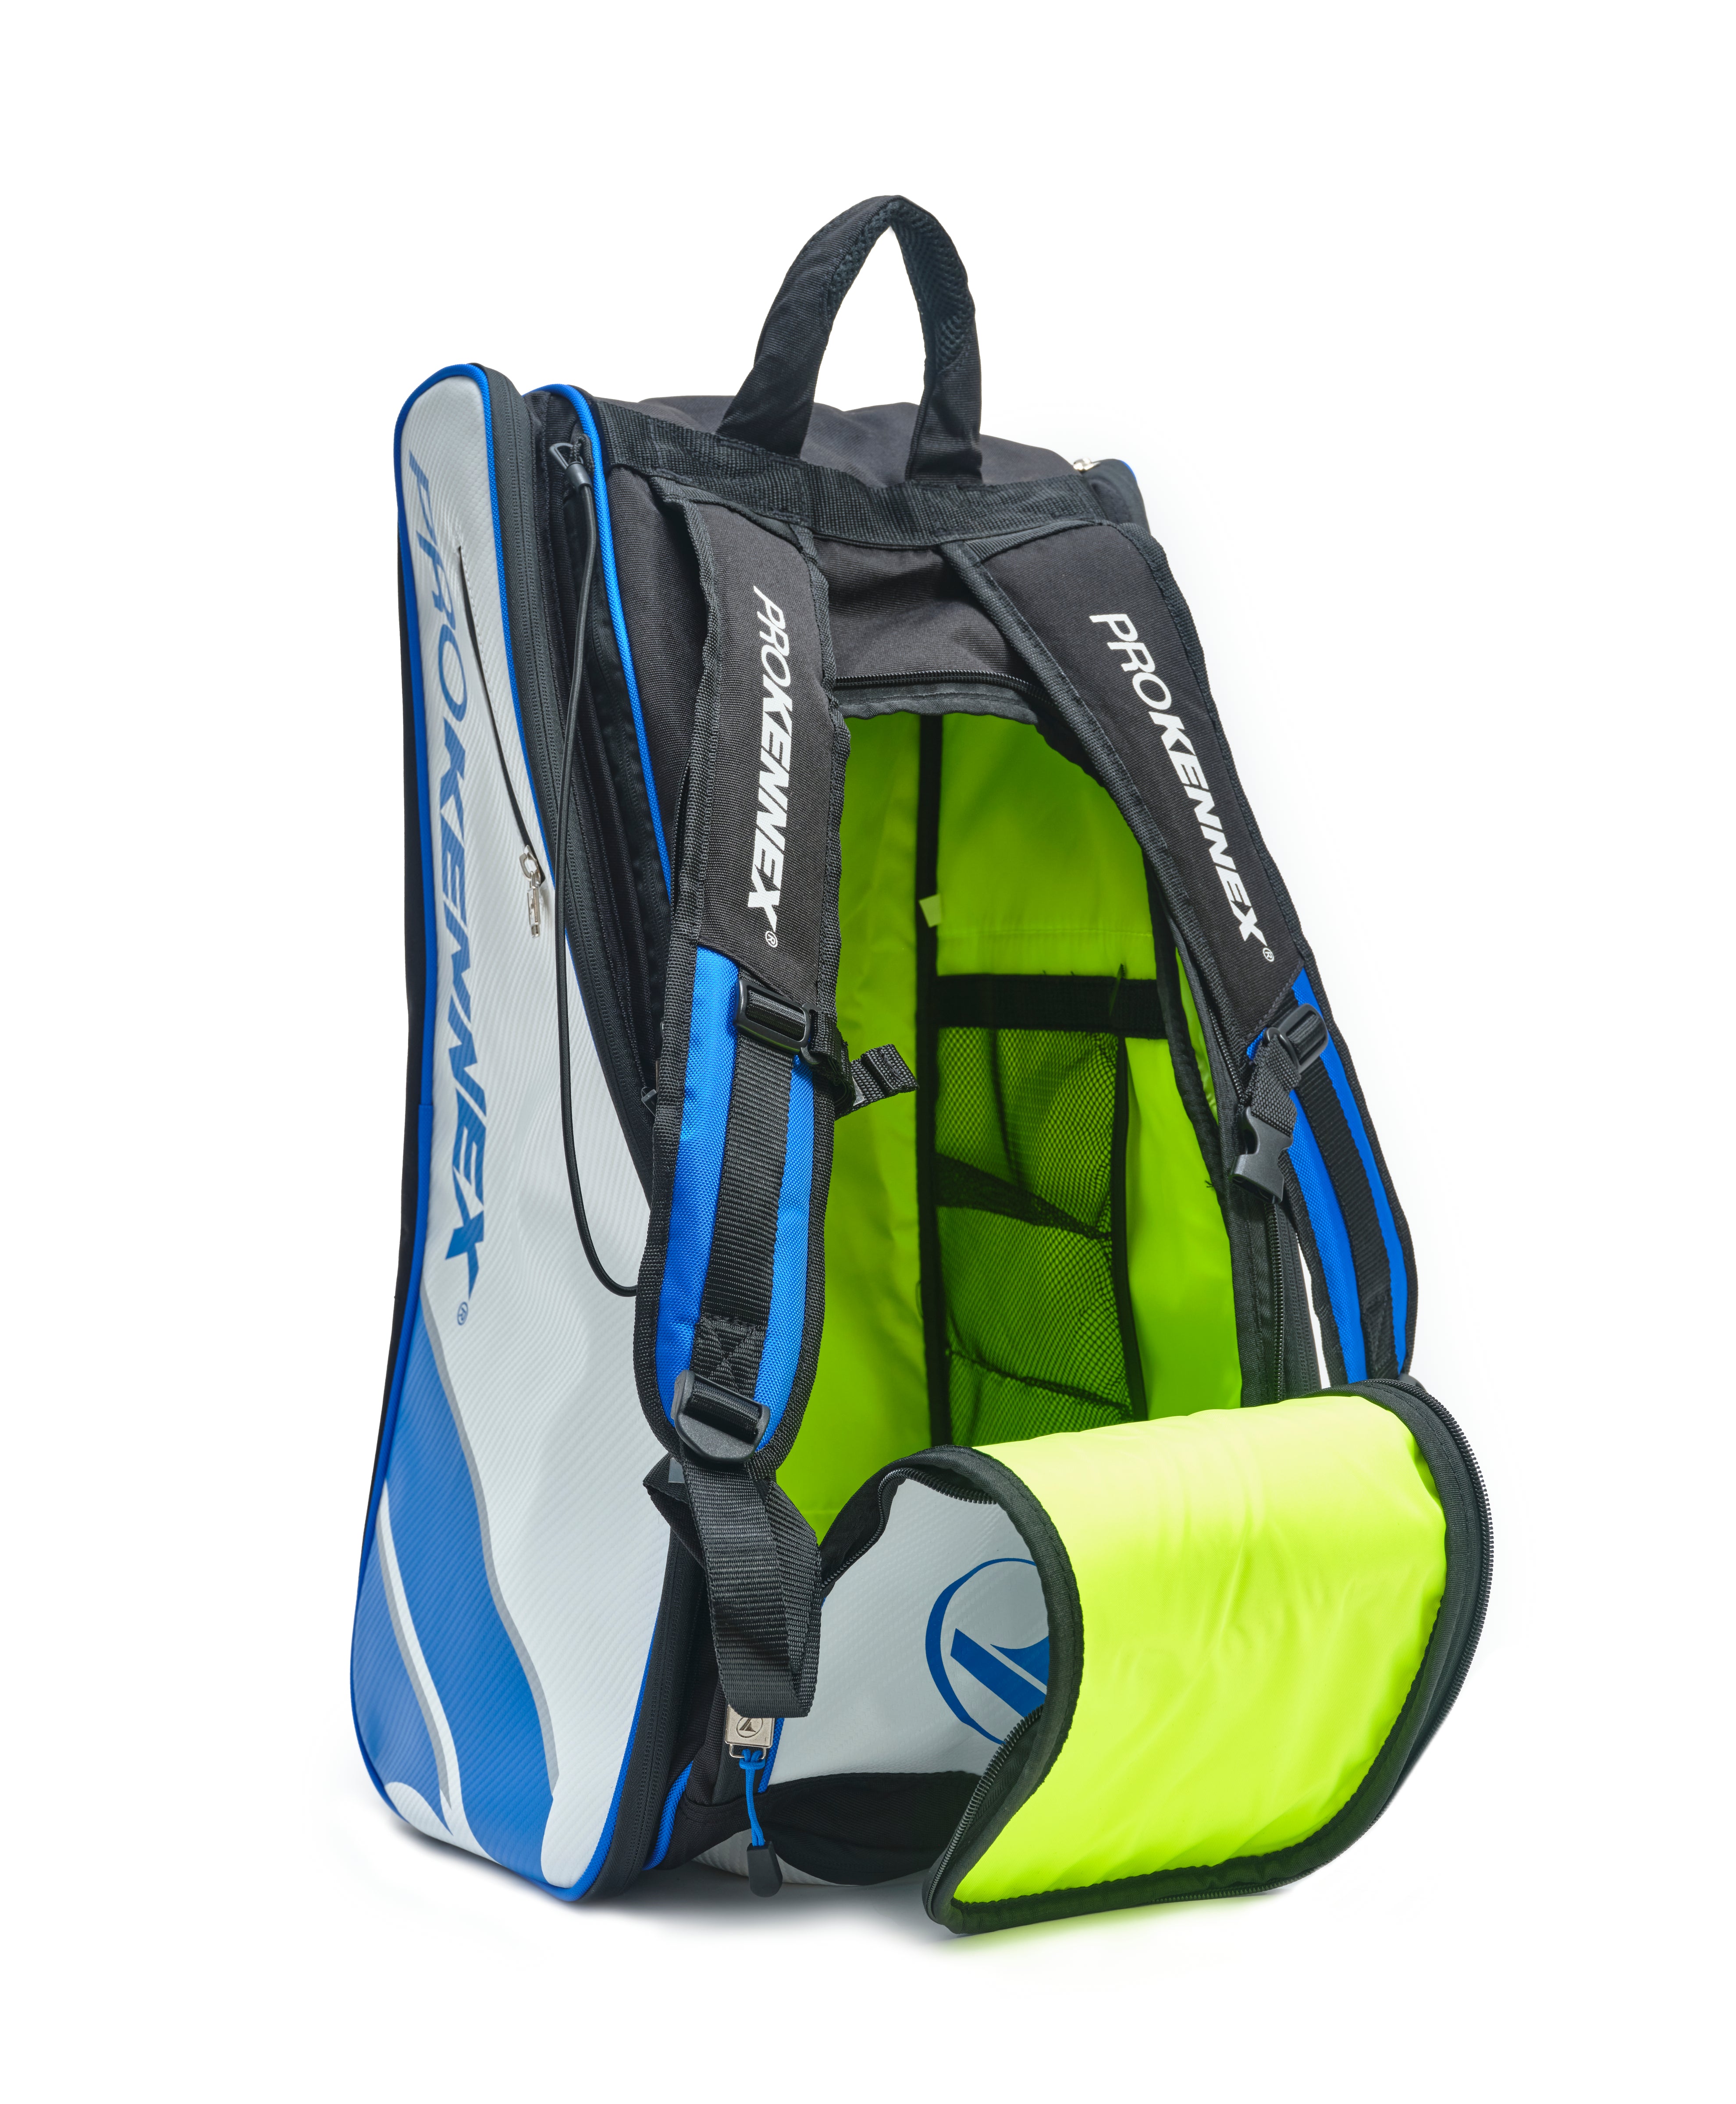 Sparco Tour Gear Bag at Competition Motorsport